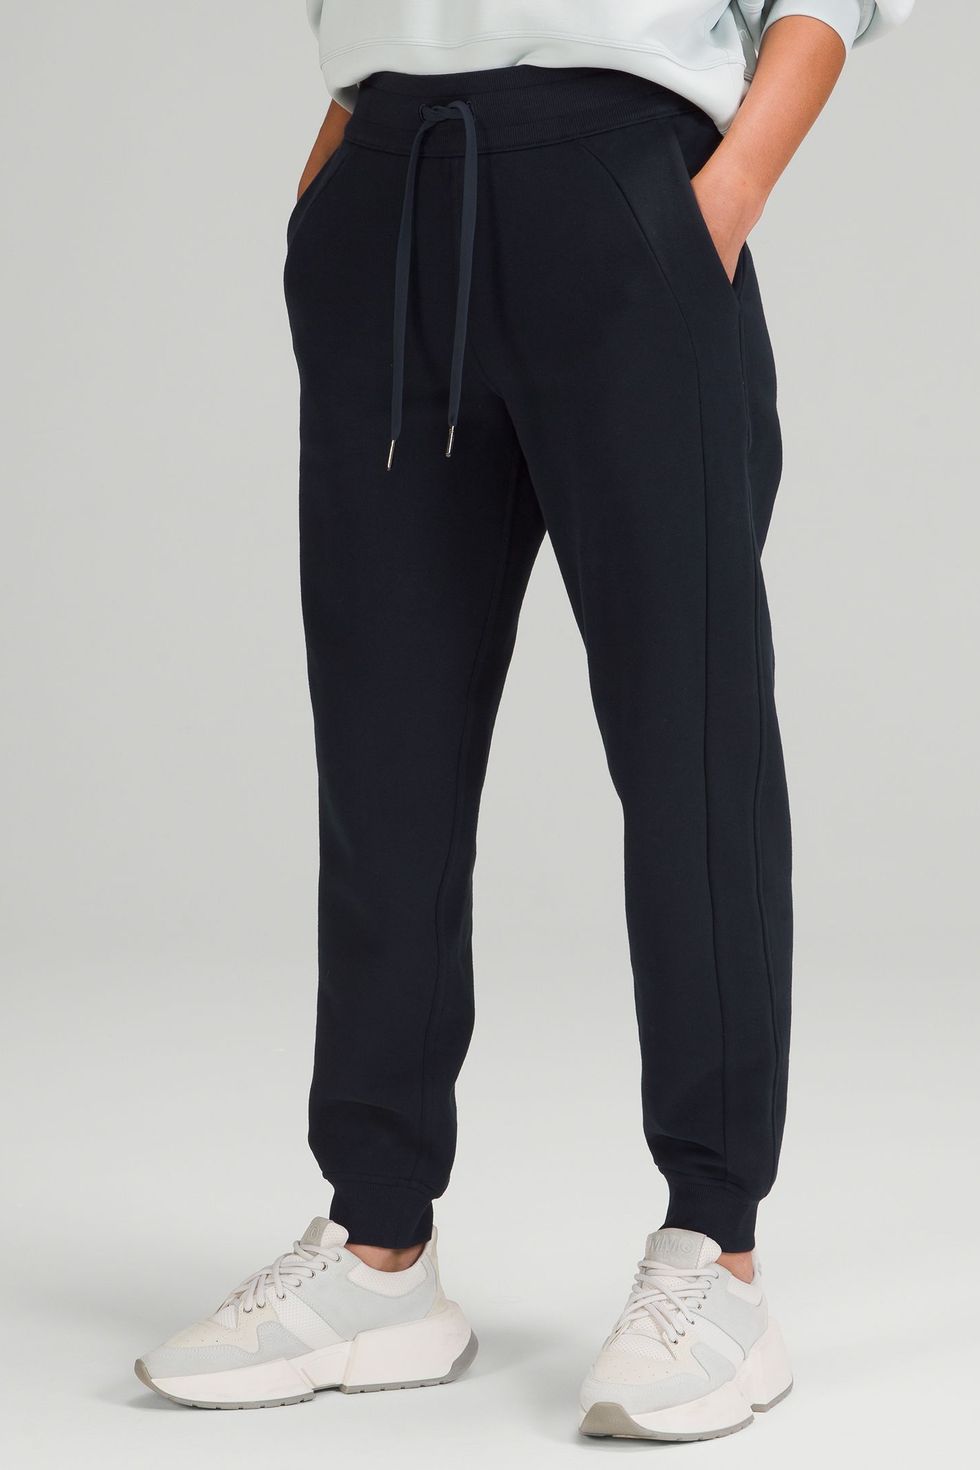 22 Best Sweatpants for Women 2023, Tested by Clothing Experts